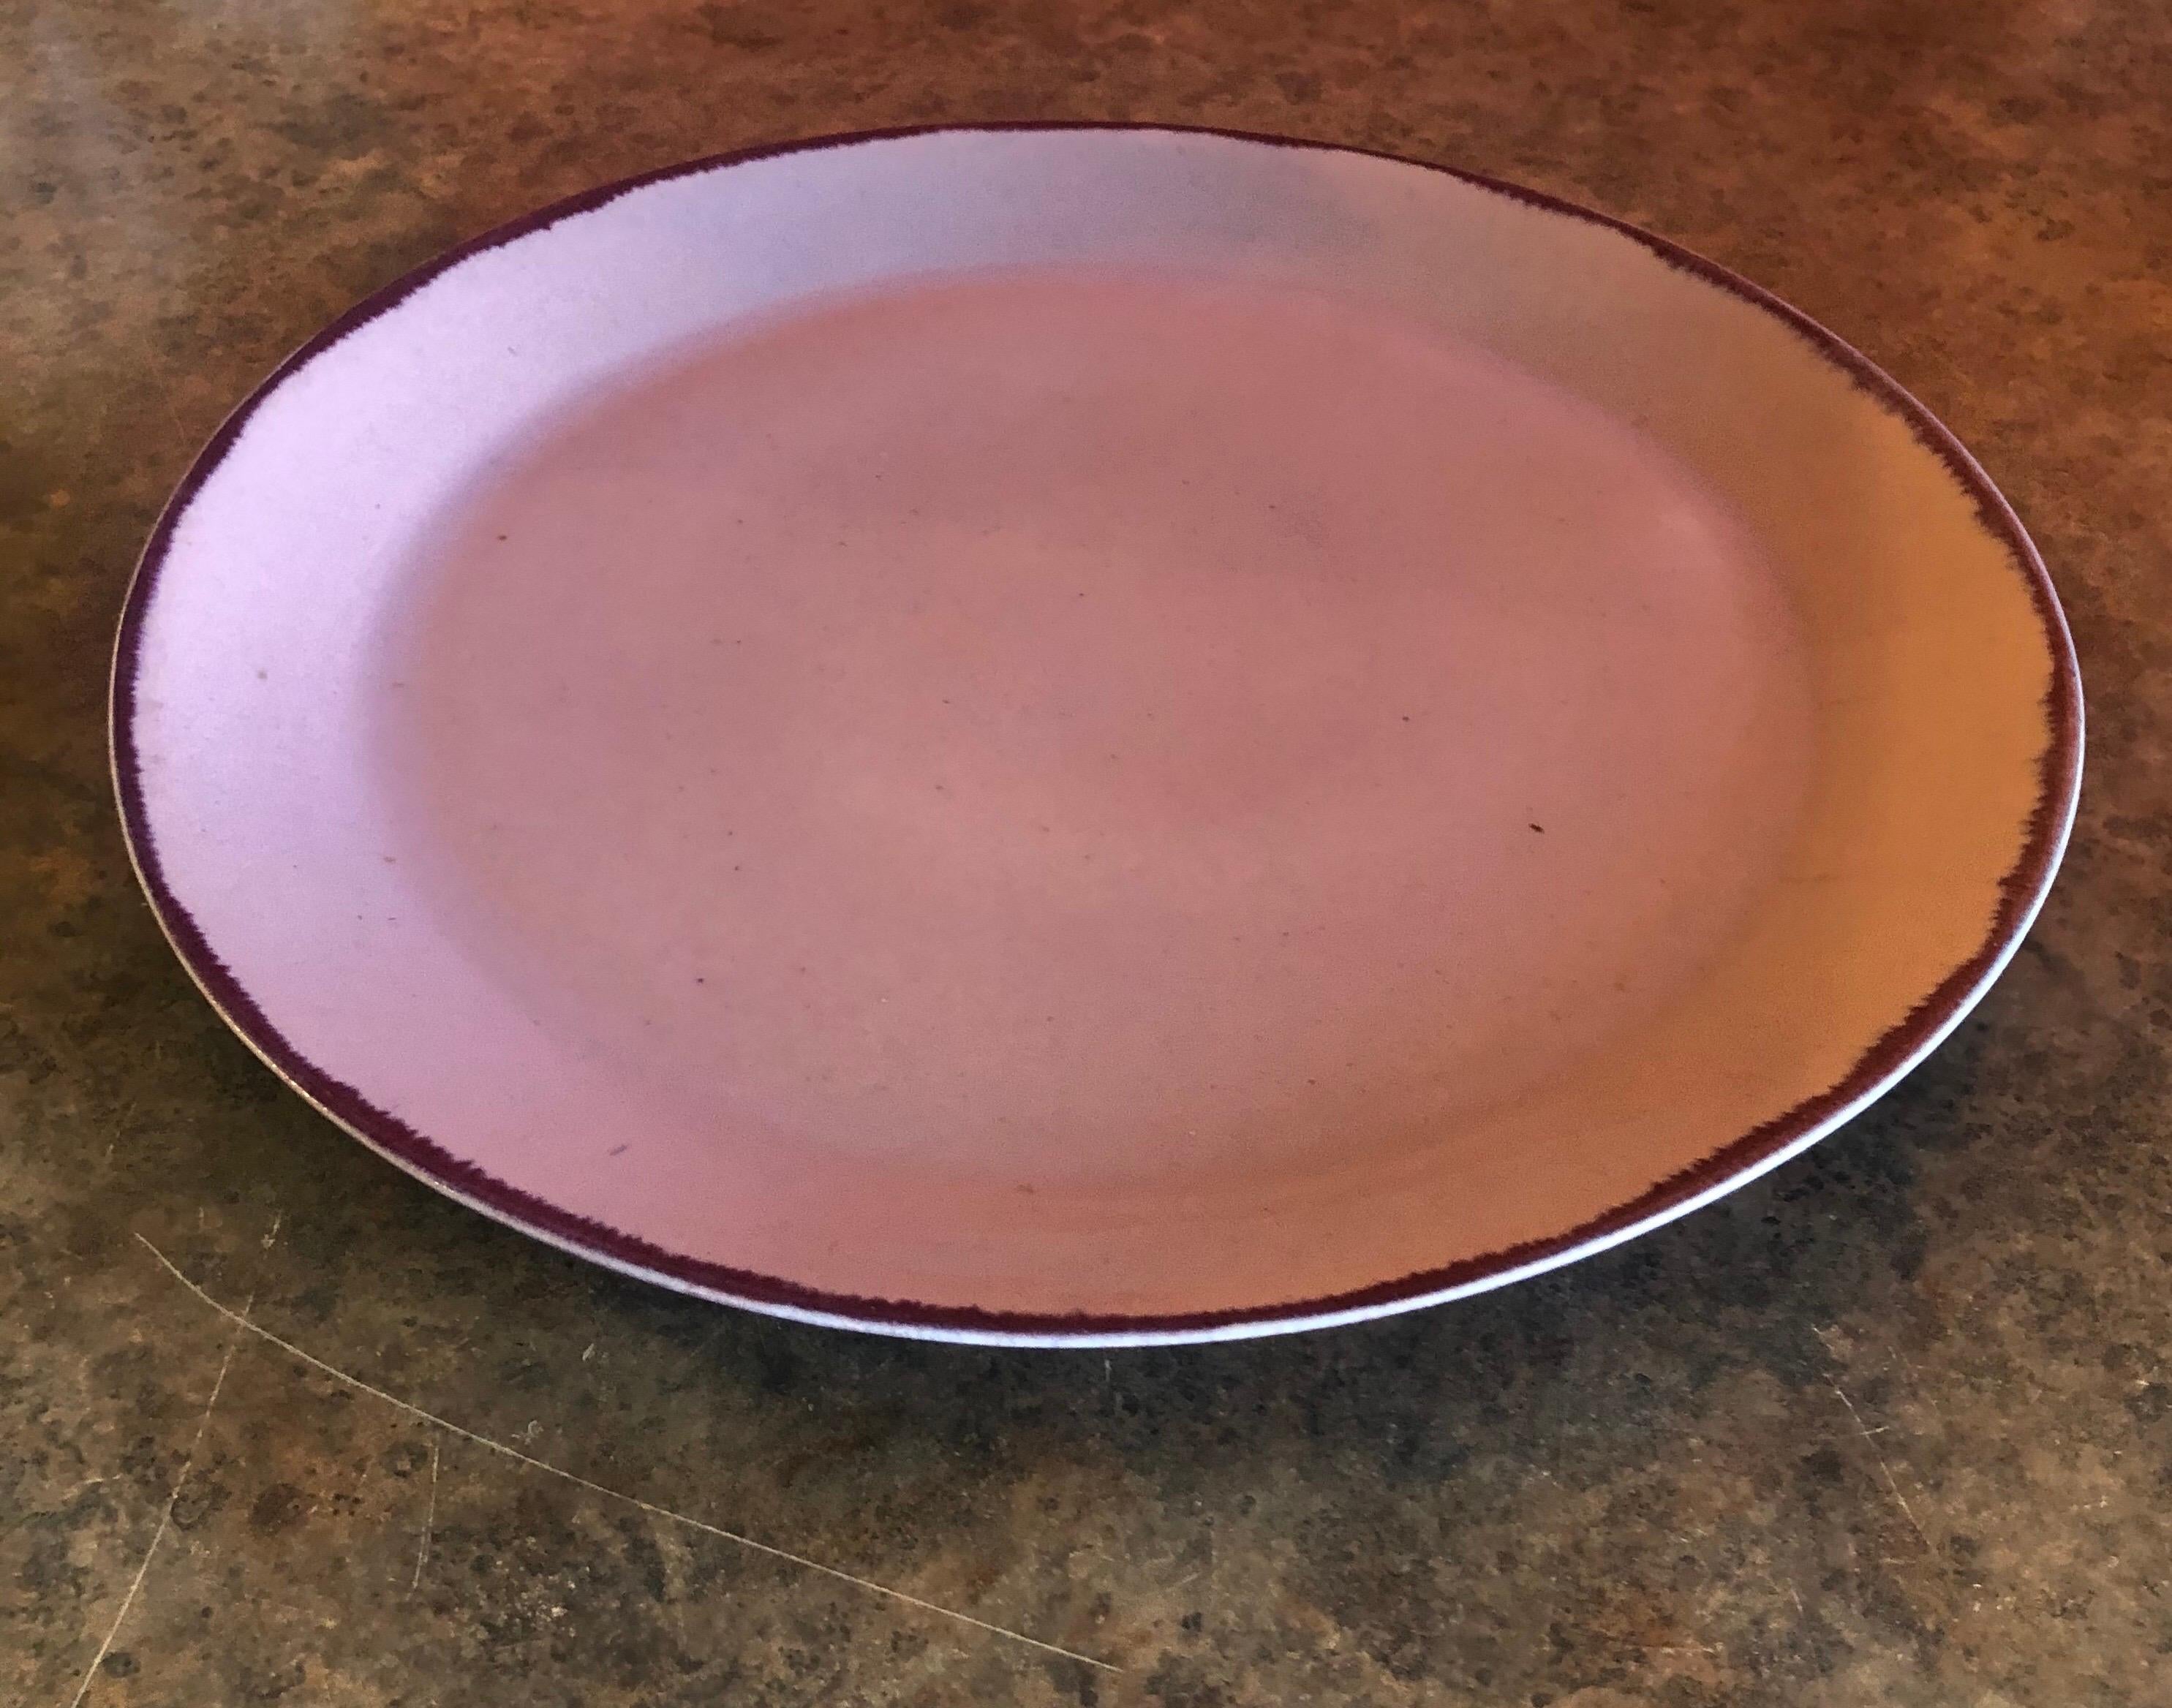 Massive midcentury platter / serving tray by Winfield Pottery of California, circa 1950s. The piece is a light pinkish-purple in color with a dark cabernet outer rim and measures 17